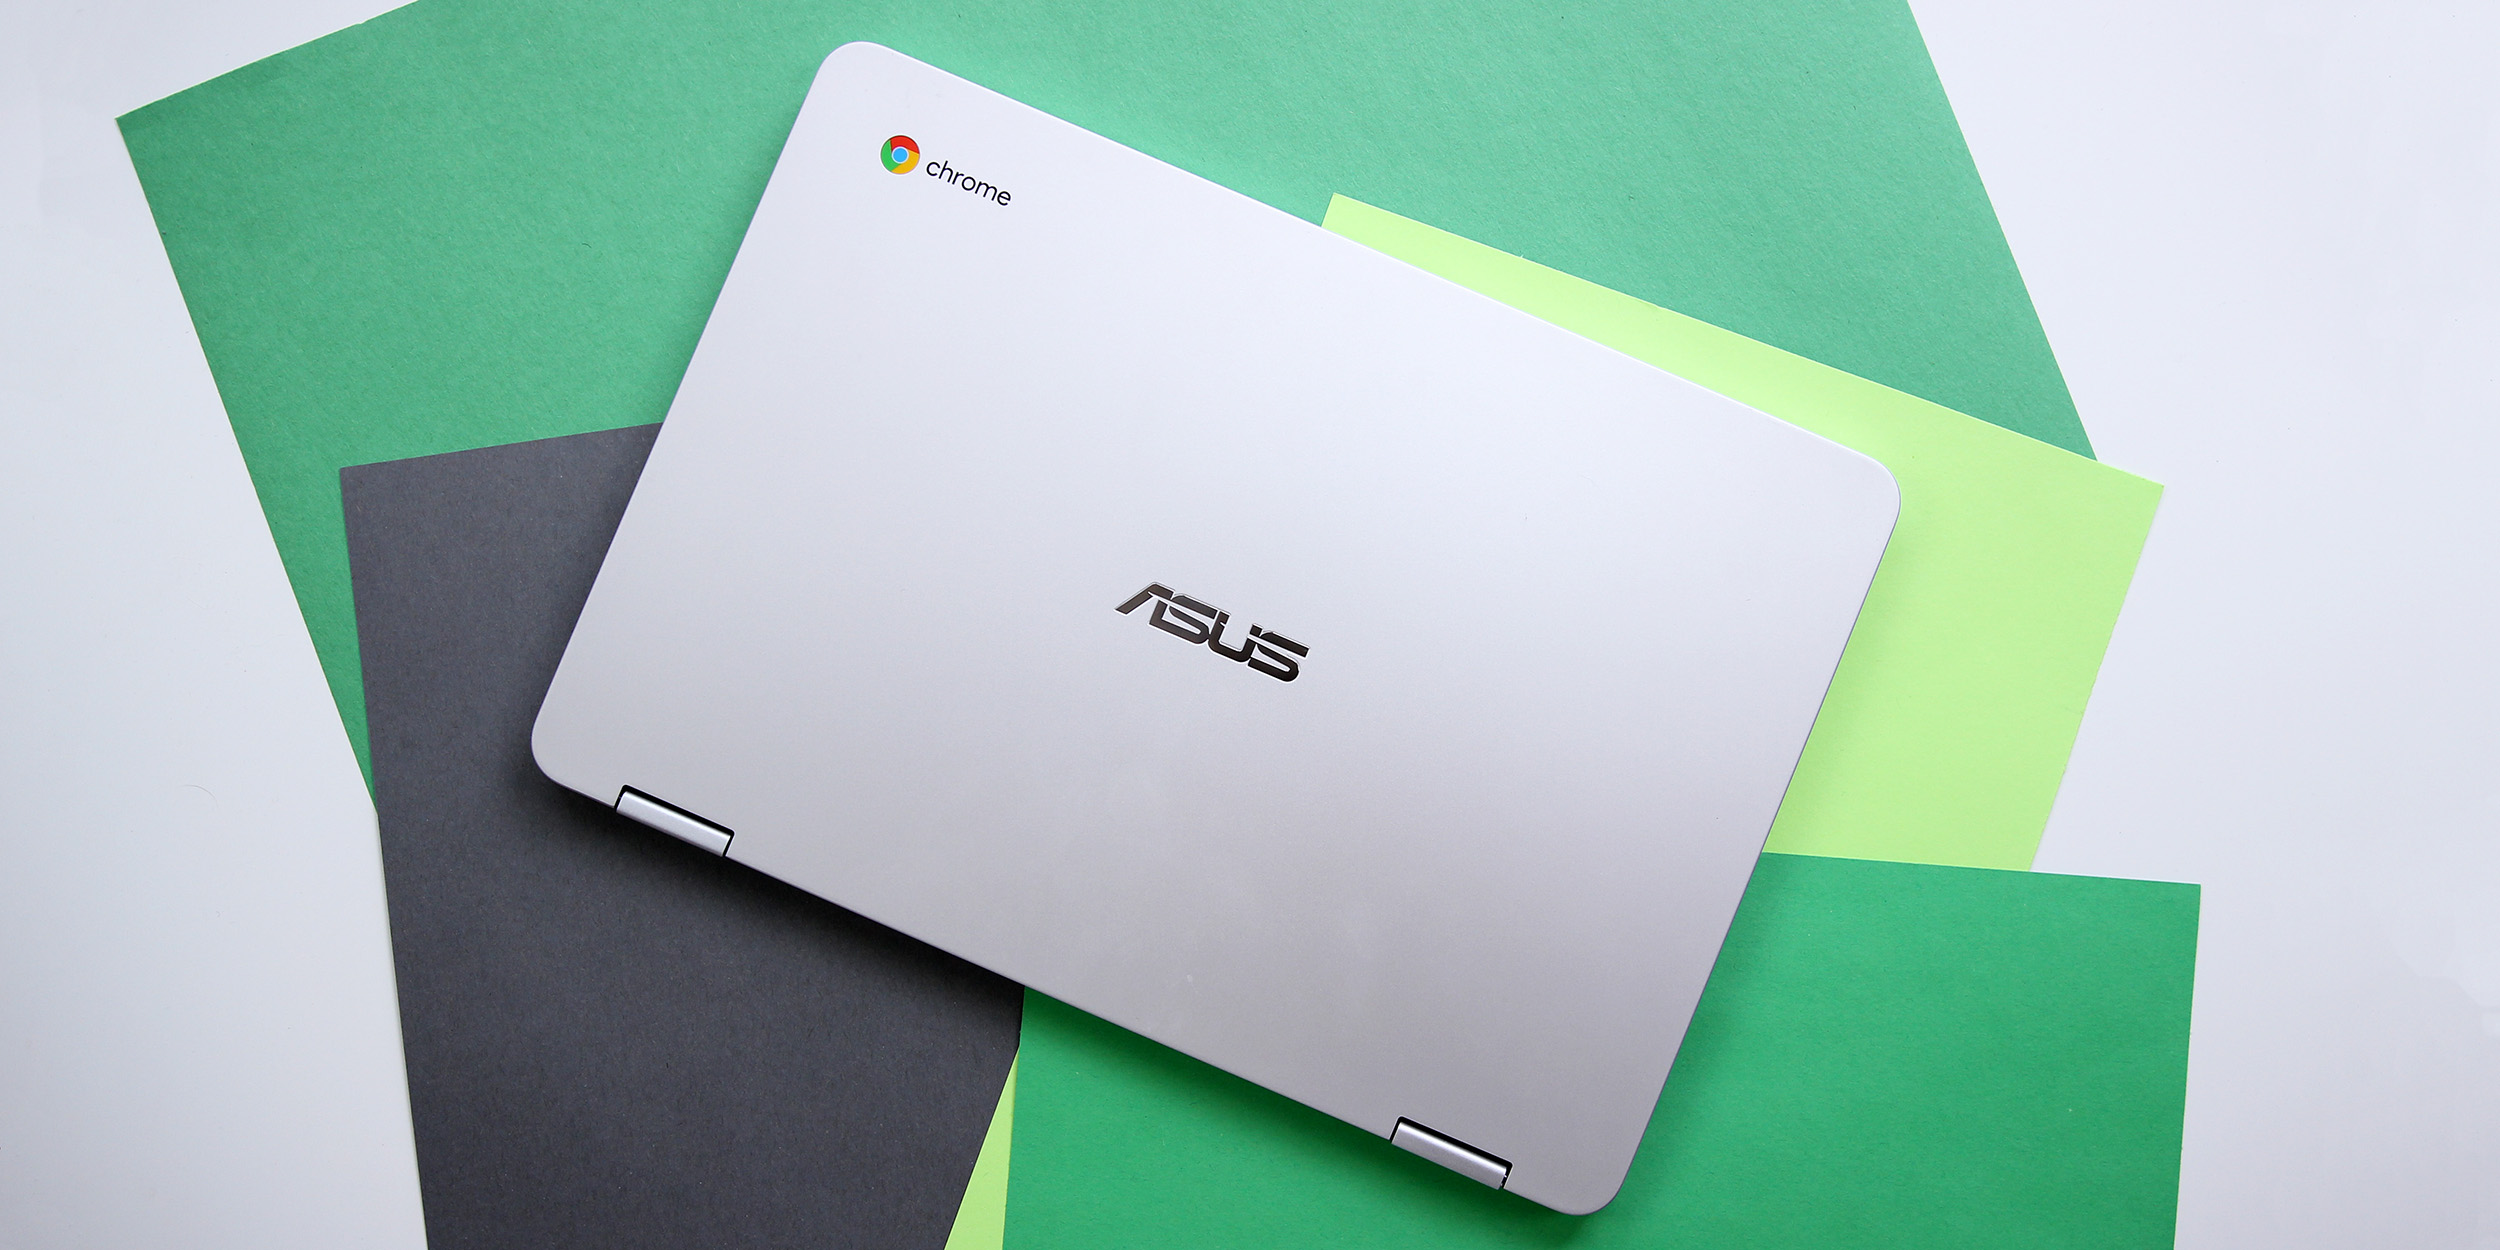 Review: ASUS Chromebook Flip C302CA is an underdog that deserves